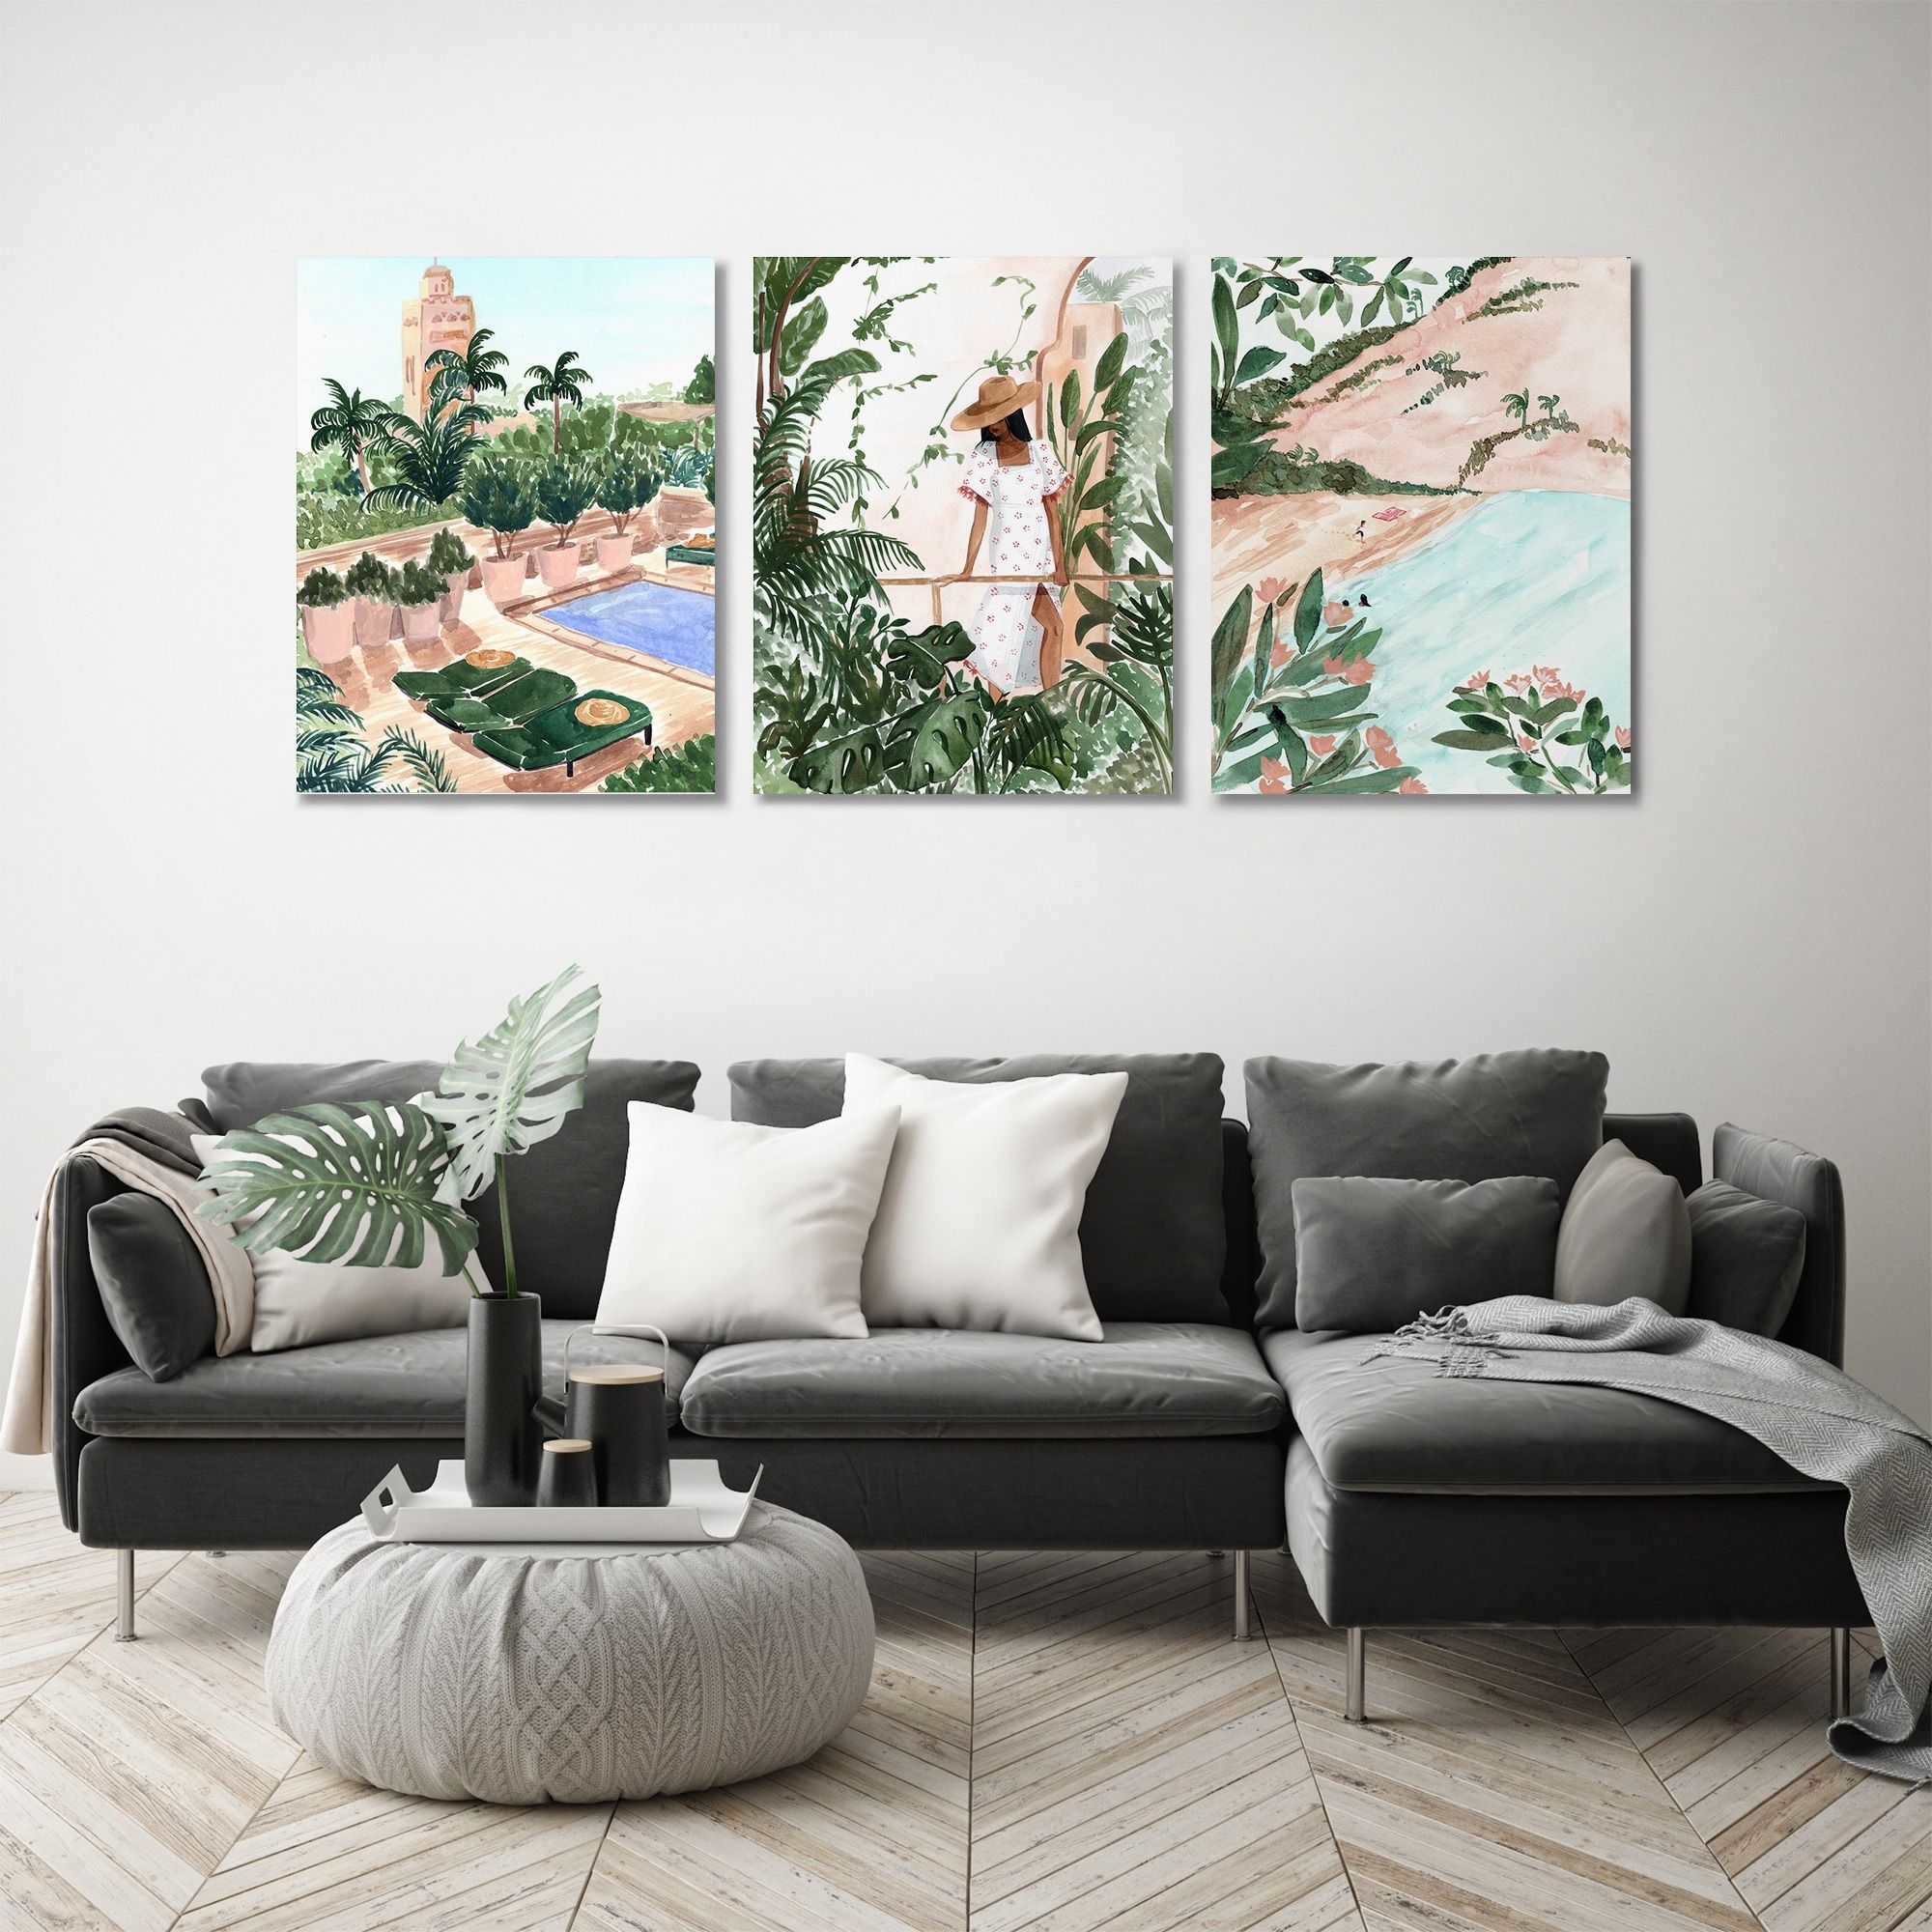 Canvas Triptych 3 Piece Art Set Boho Tropical Paradisesabina Fenn –  Overstock – 33309244 Intended For Most Current Tropical Paradise Wall Art (View 15 of 20)